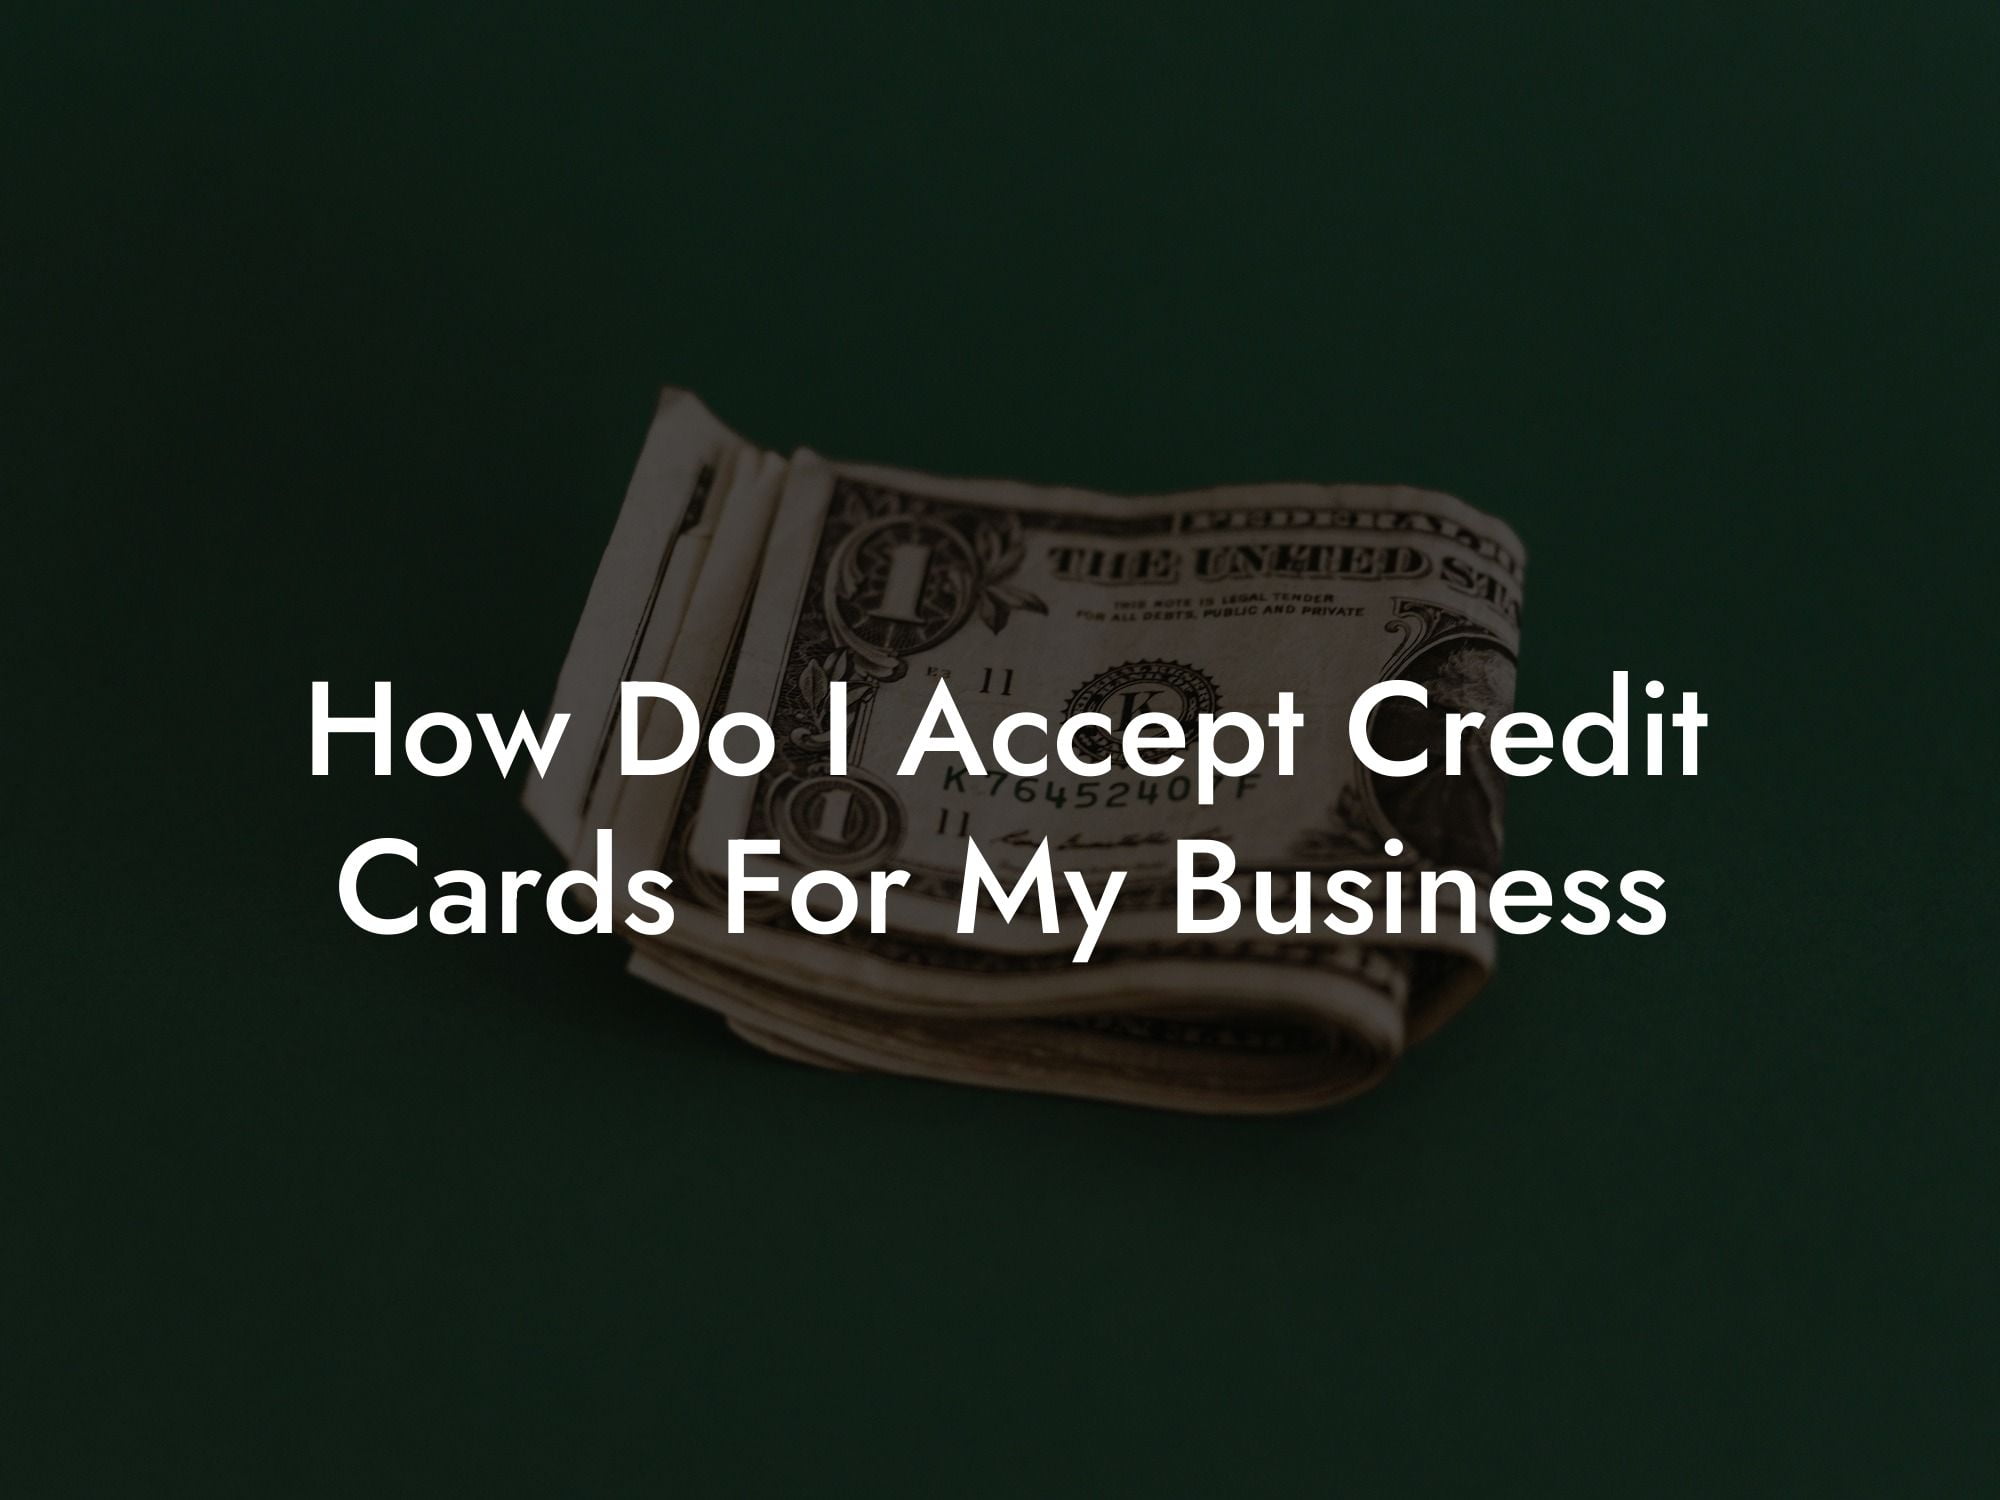 How Do I Accept Credit Cards For My Business